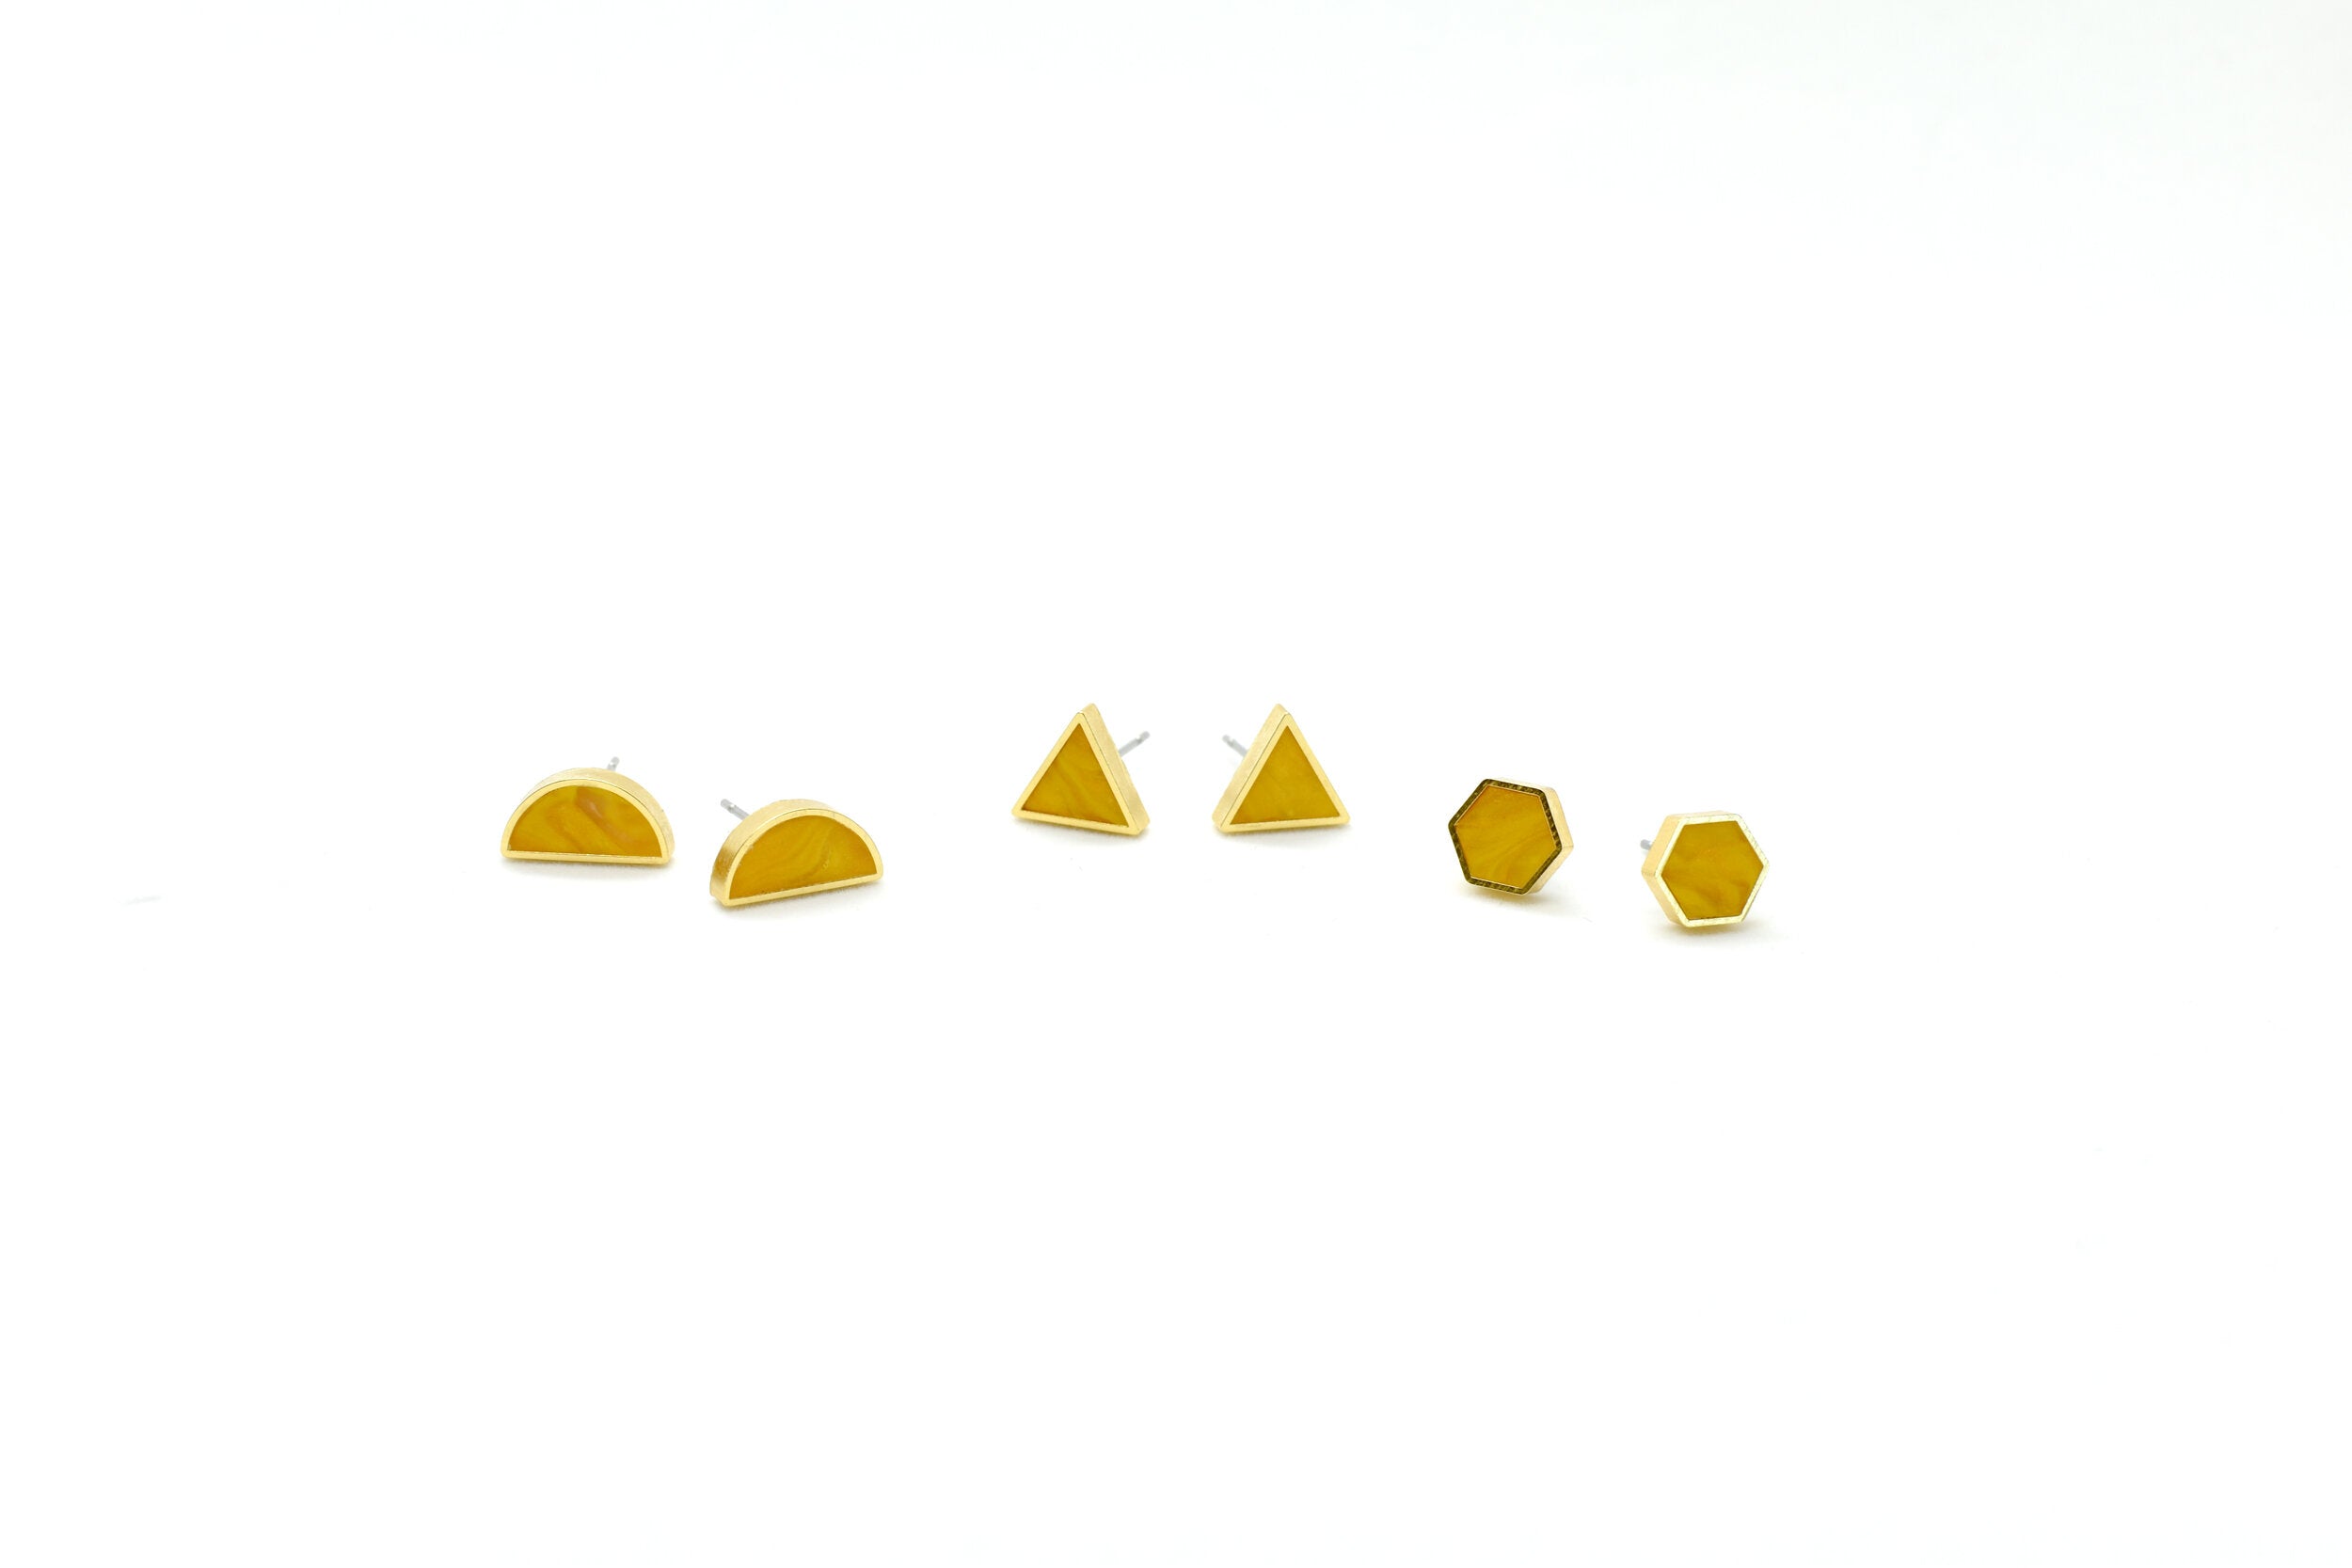 a few pairs of citrine clay stud earrings polymer earrings in geometric shapes hexagon triangle half moon tiny gold studs november birthstone present